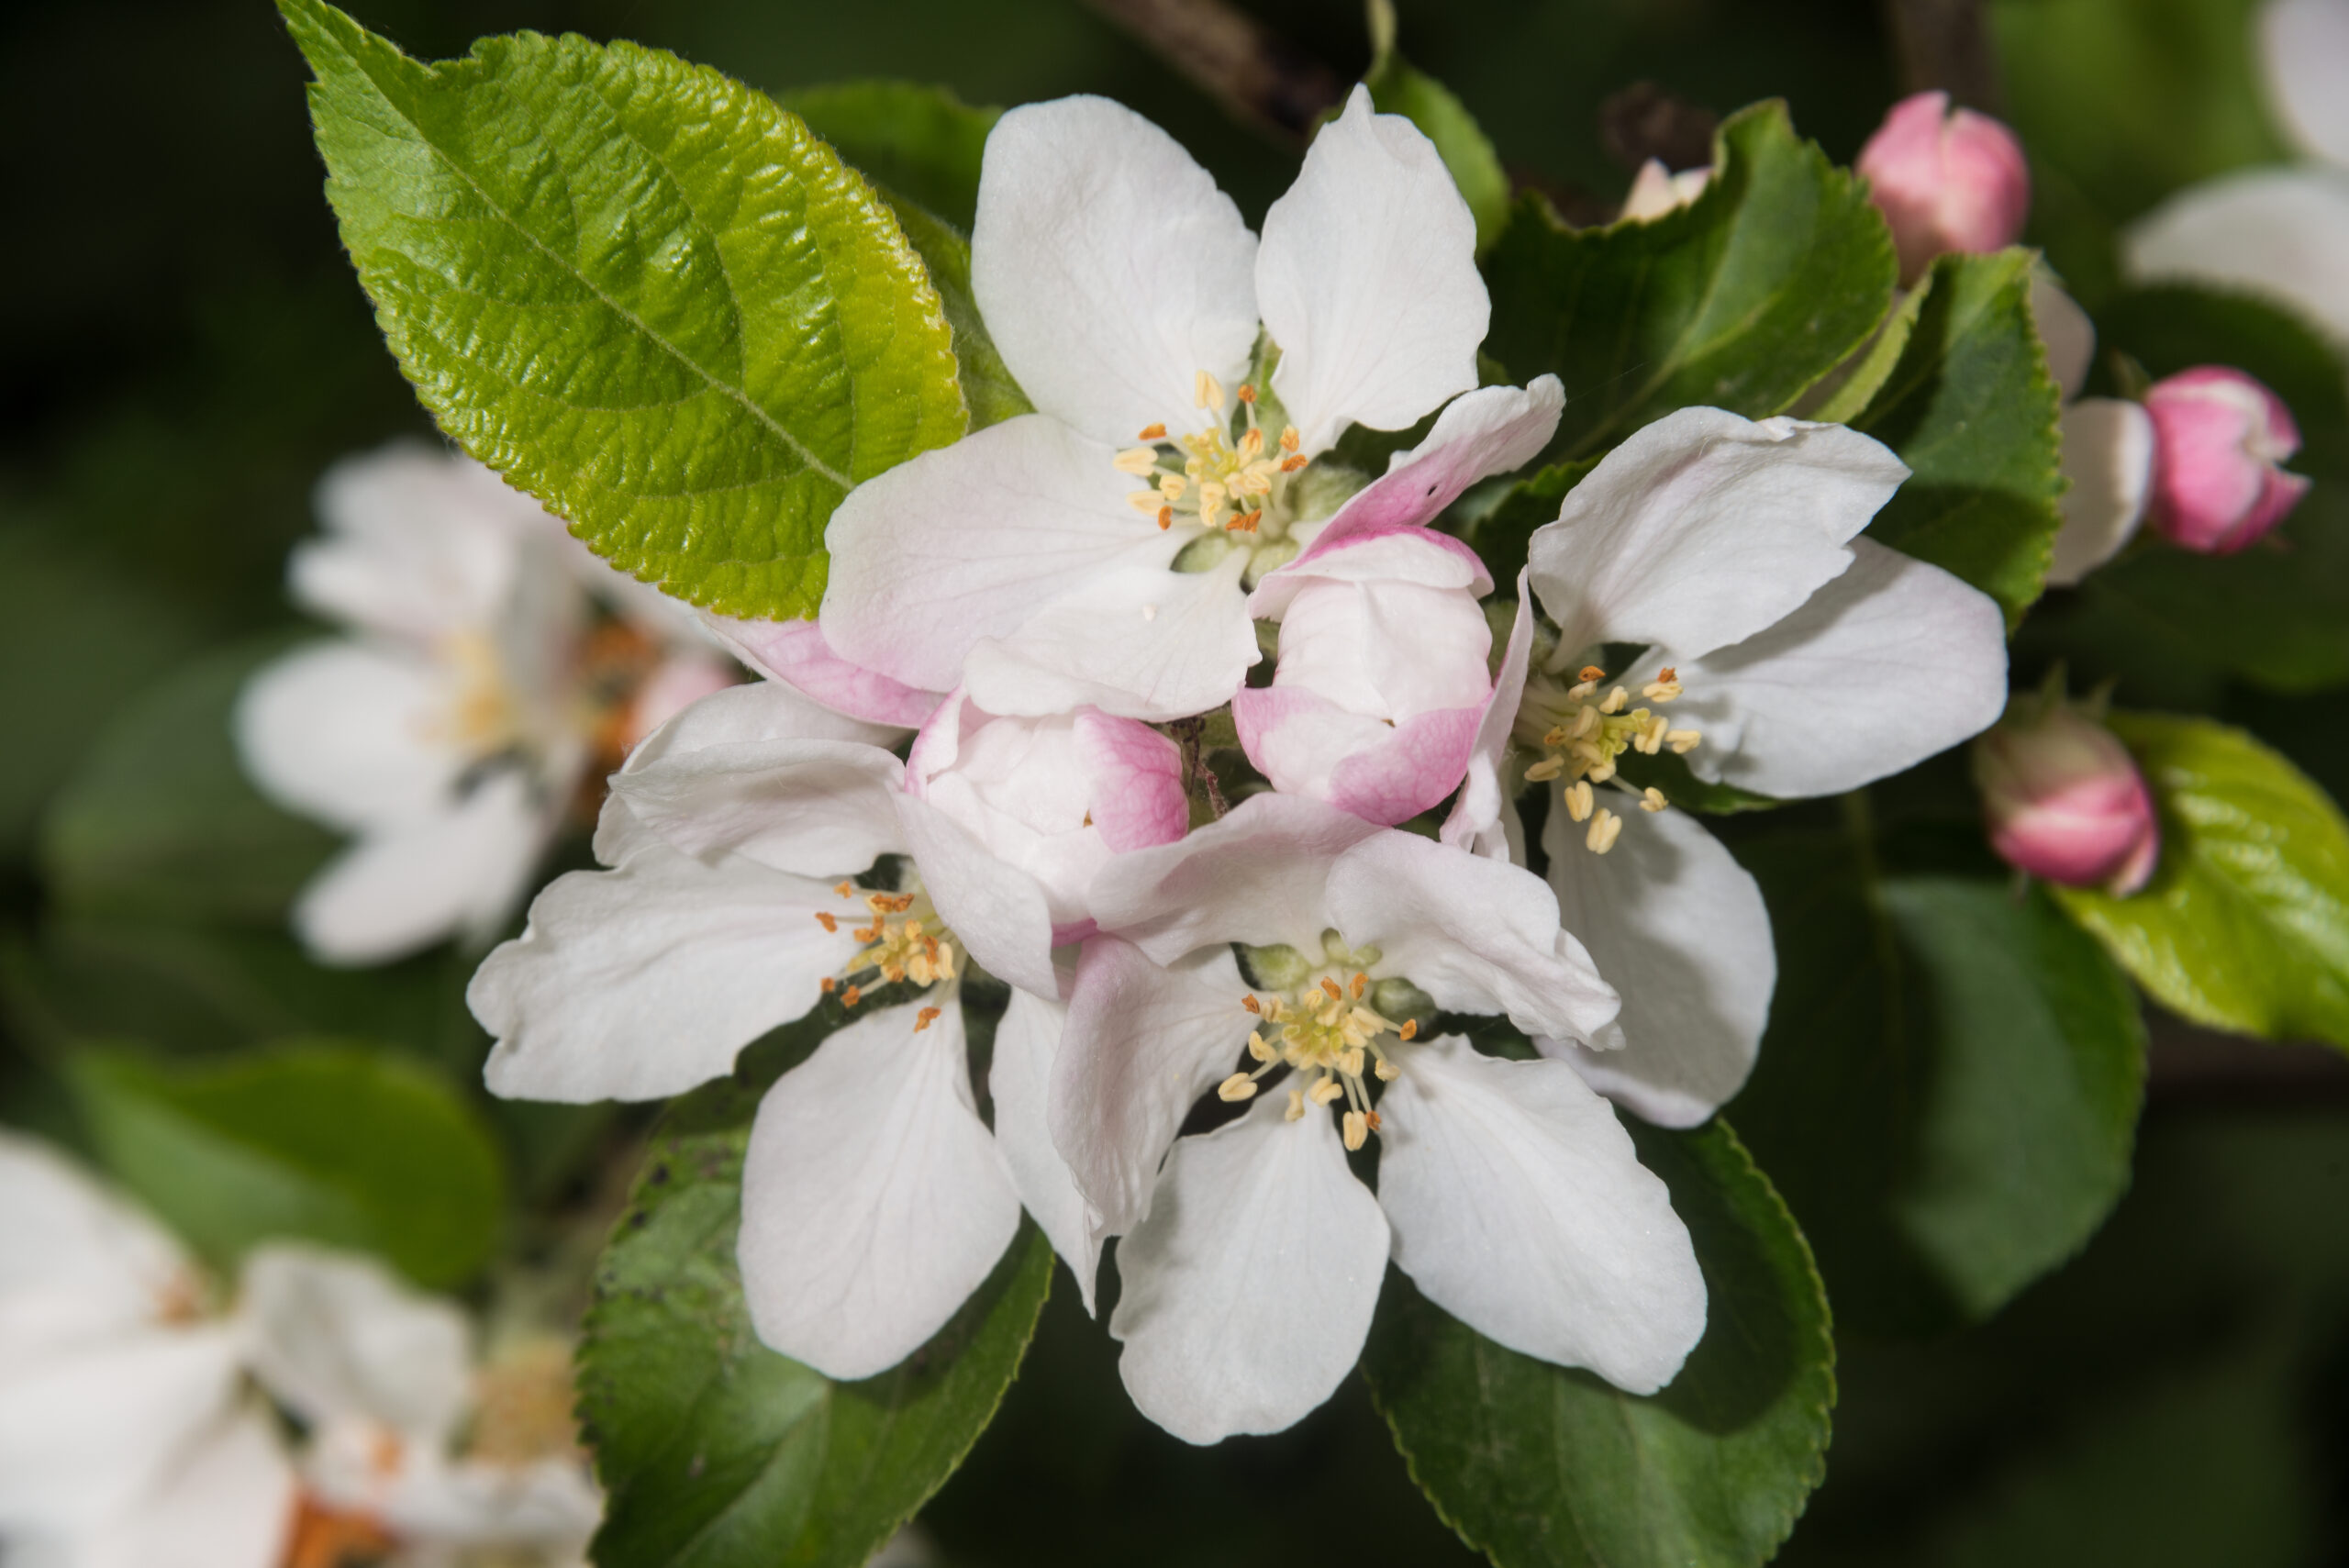 Malus sylvestris mature white flower blossoms with pink tips